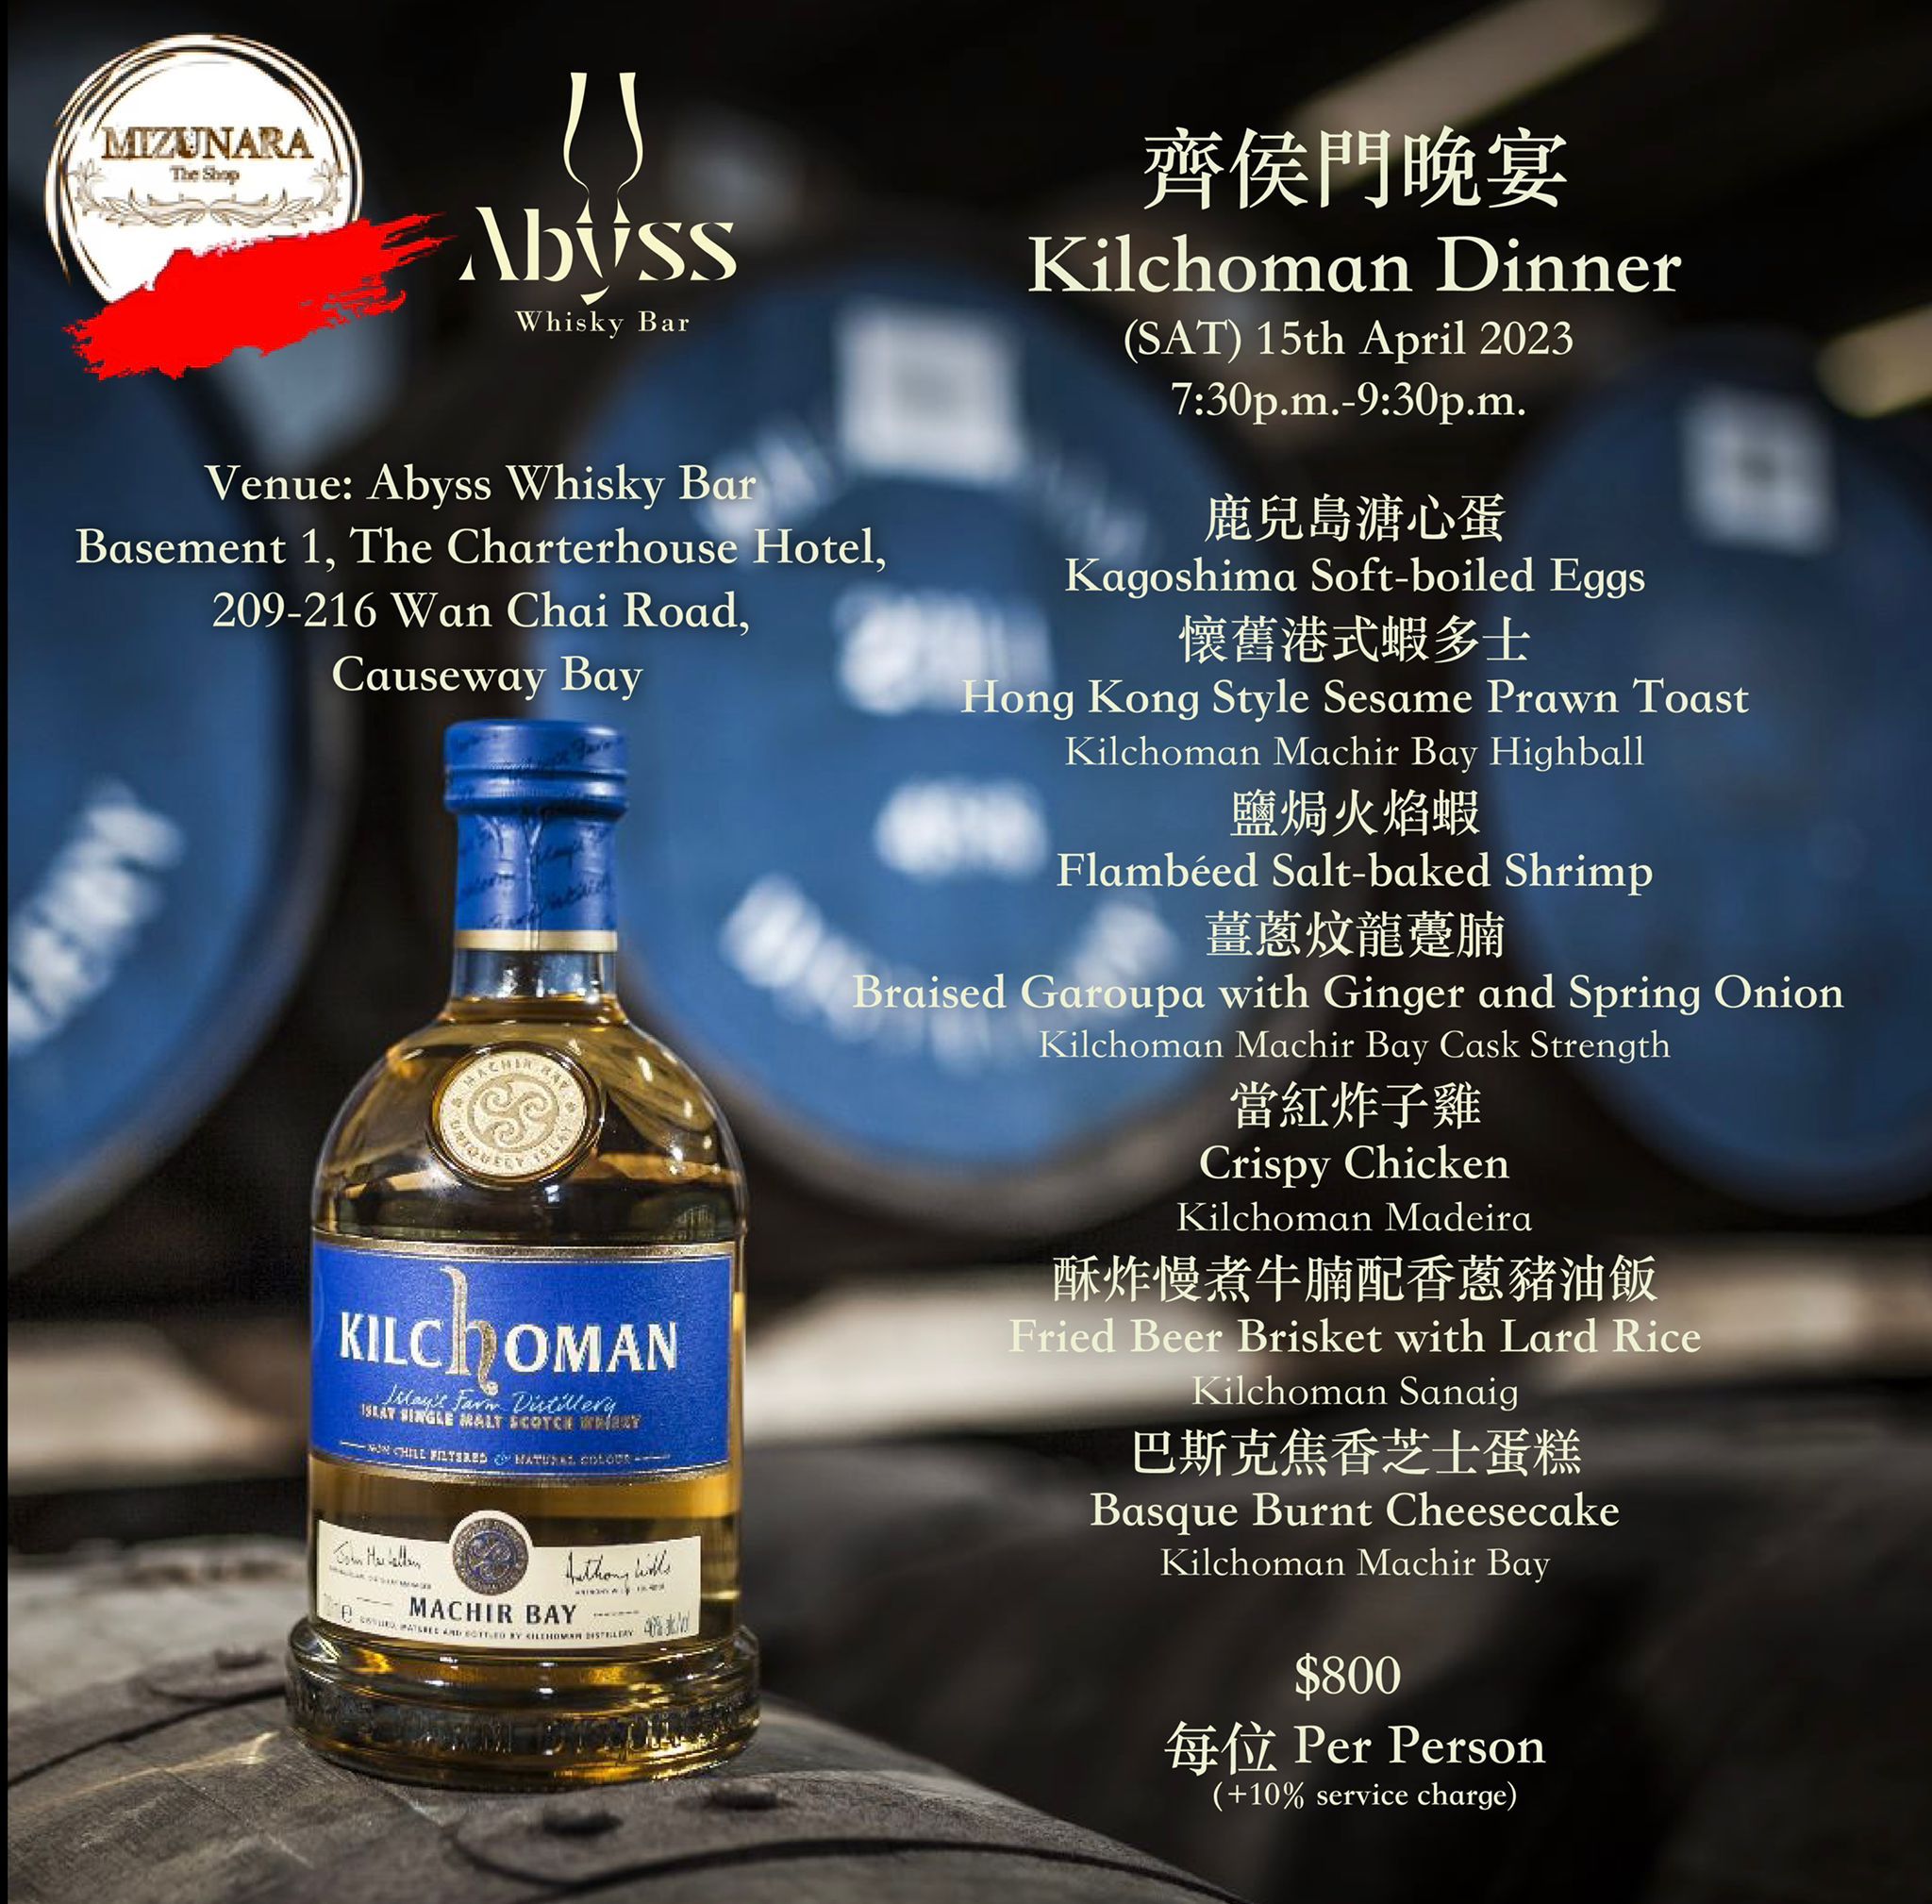 Abyss Whisky Bar "7 Course Chinese Food Pairing x Kilchoman Islay Whisky" with Peter Wills on April 15th 2023 @ 7:30 p.m.